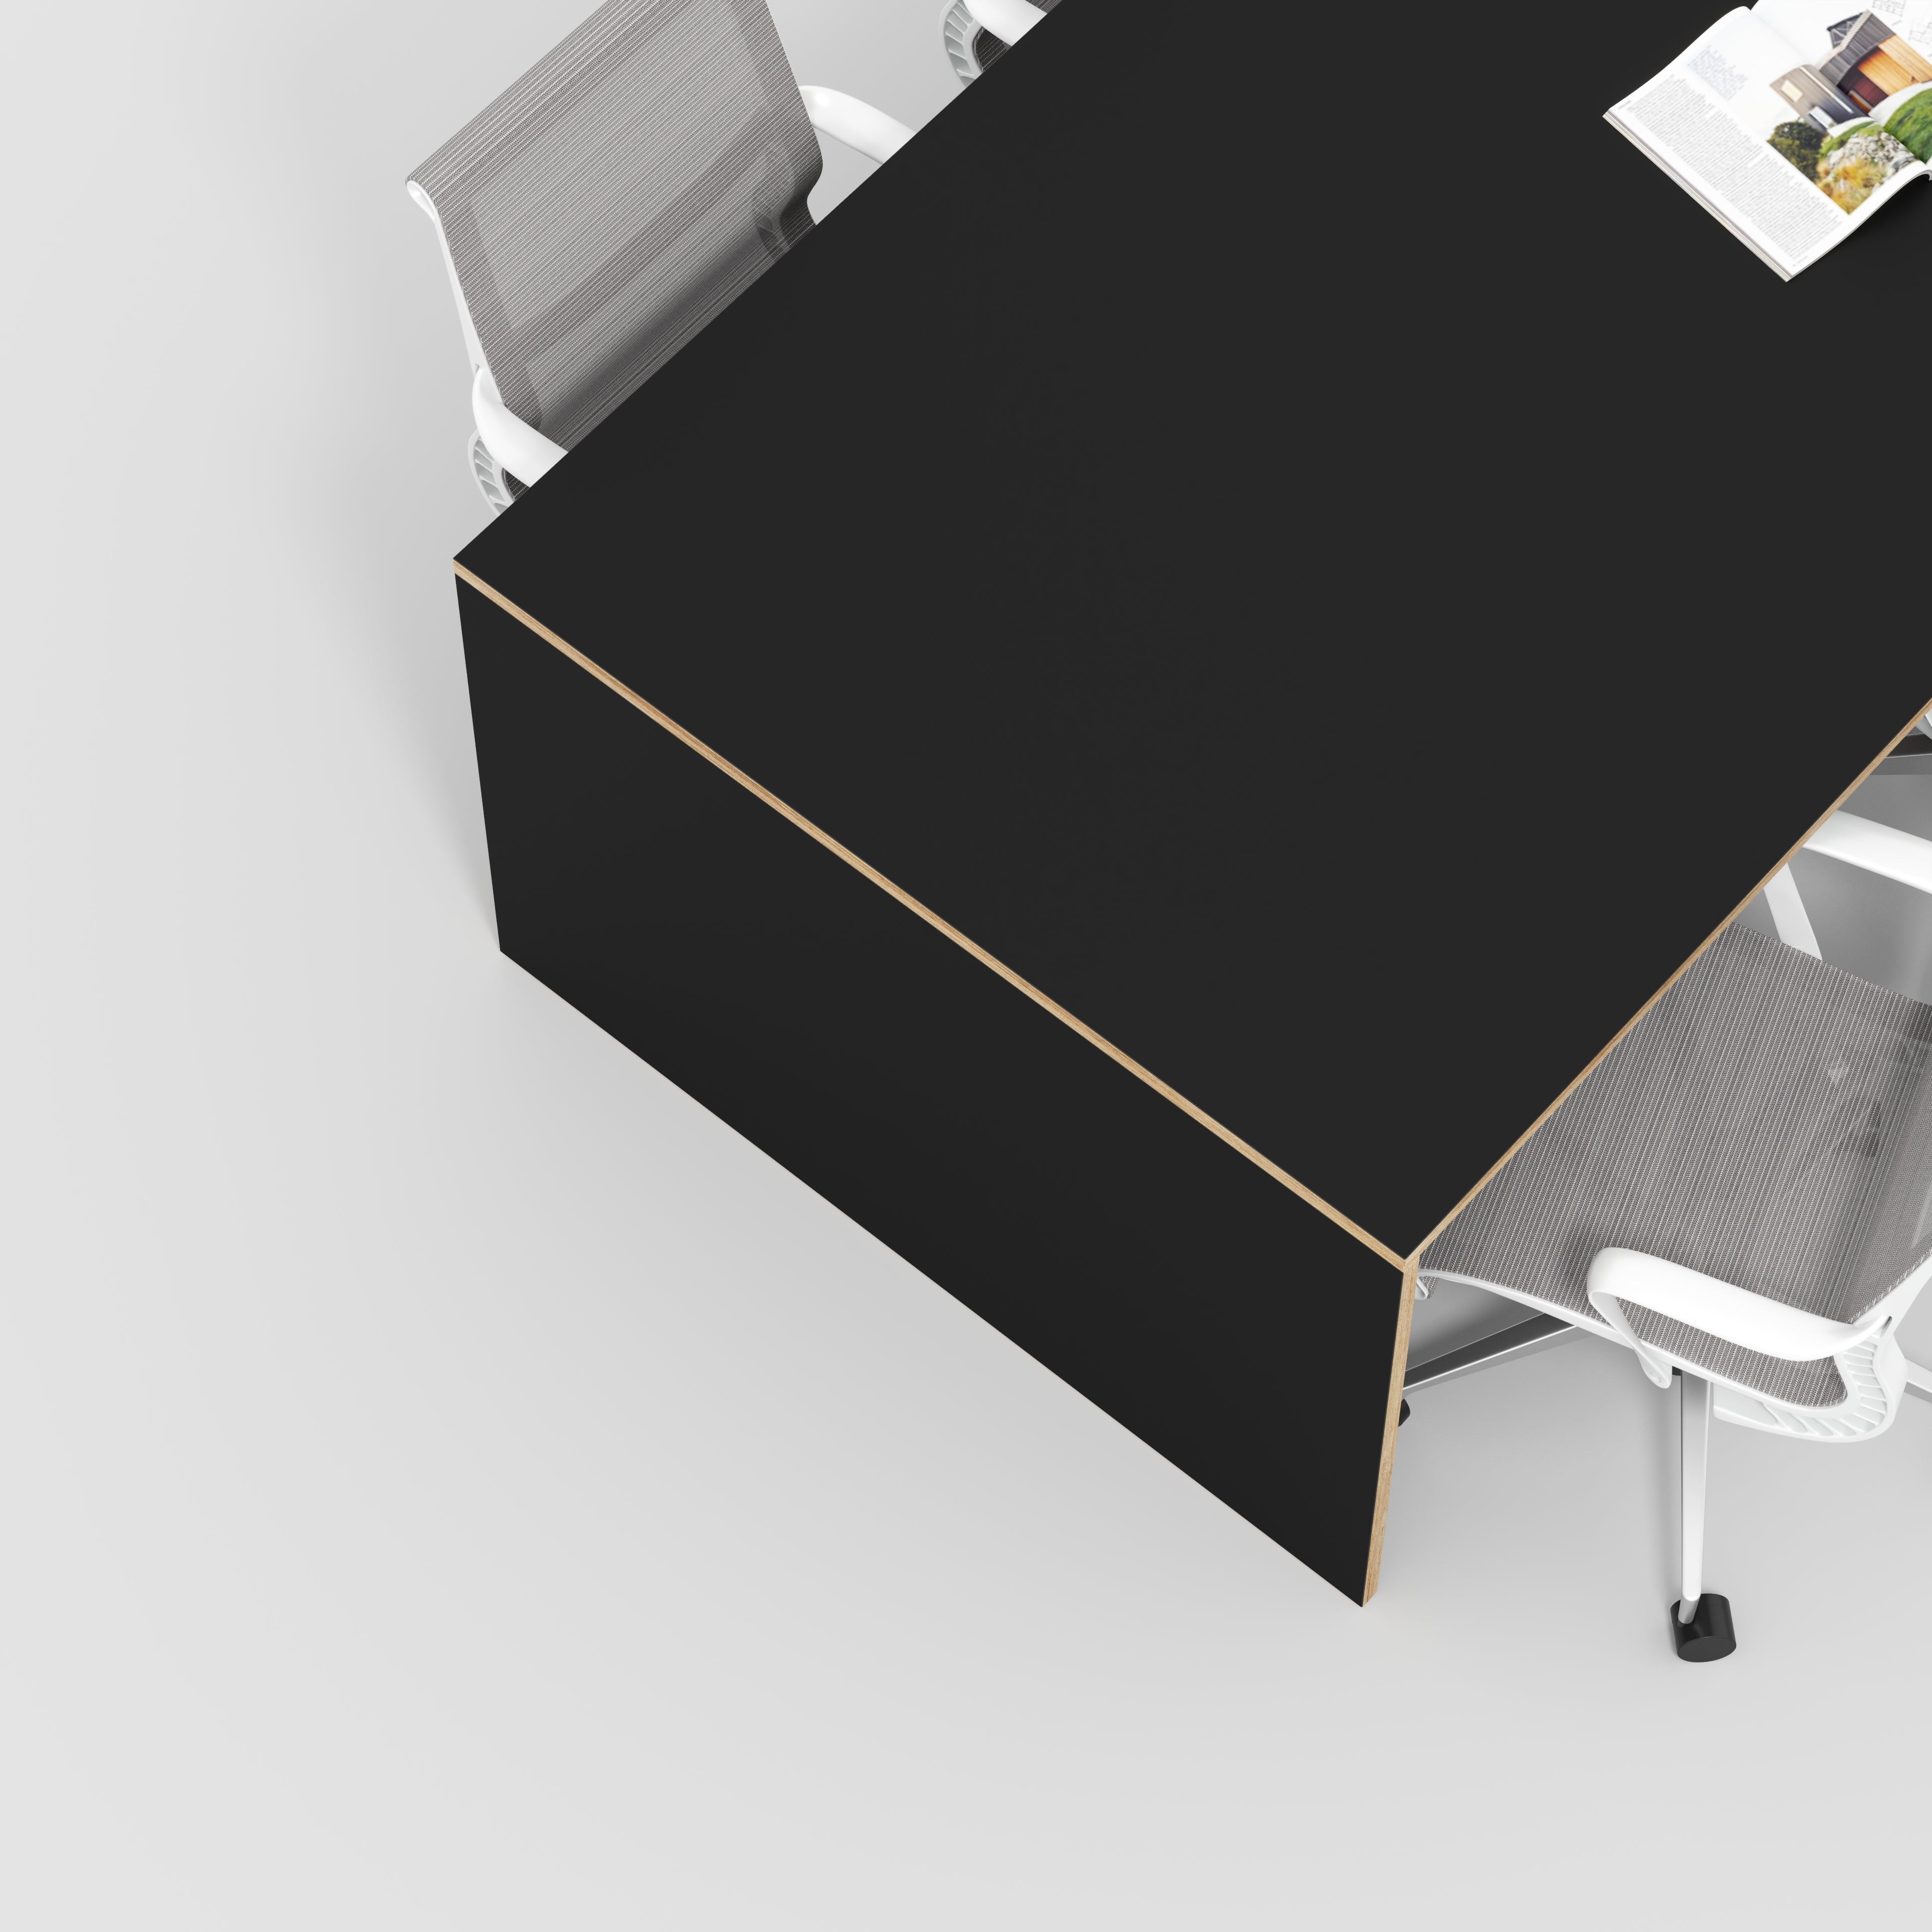 Table with Solid Sides - Formica Diamond Black - 2400(w) x 1200(d) x 735(h)